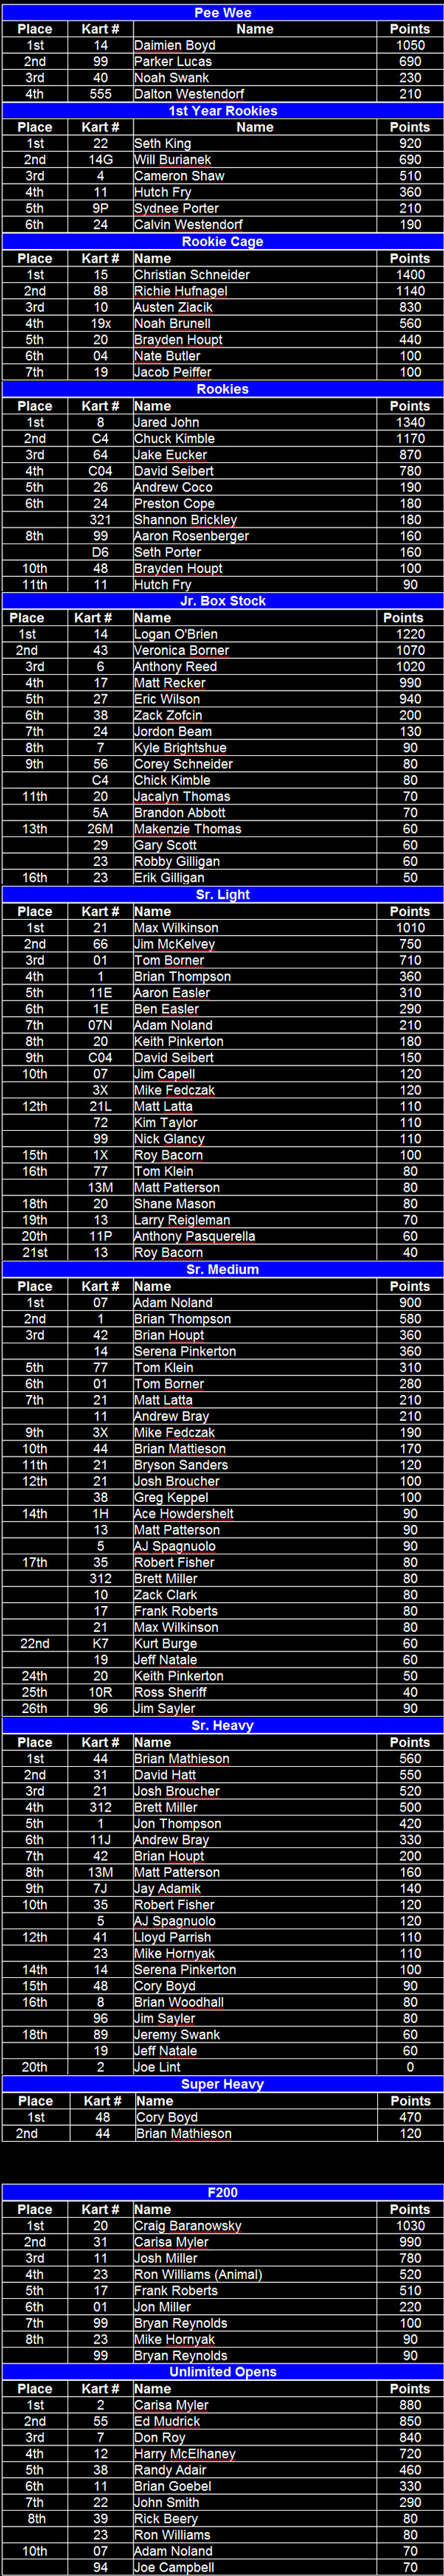 Naugle Speedway 2009 Final Point Standings